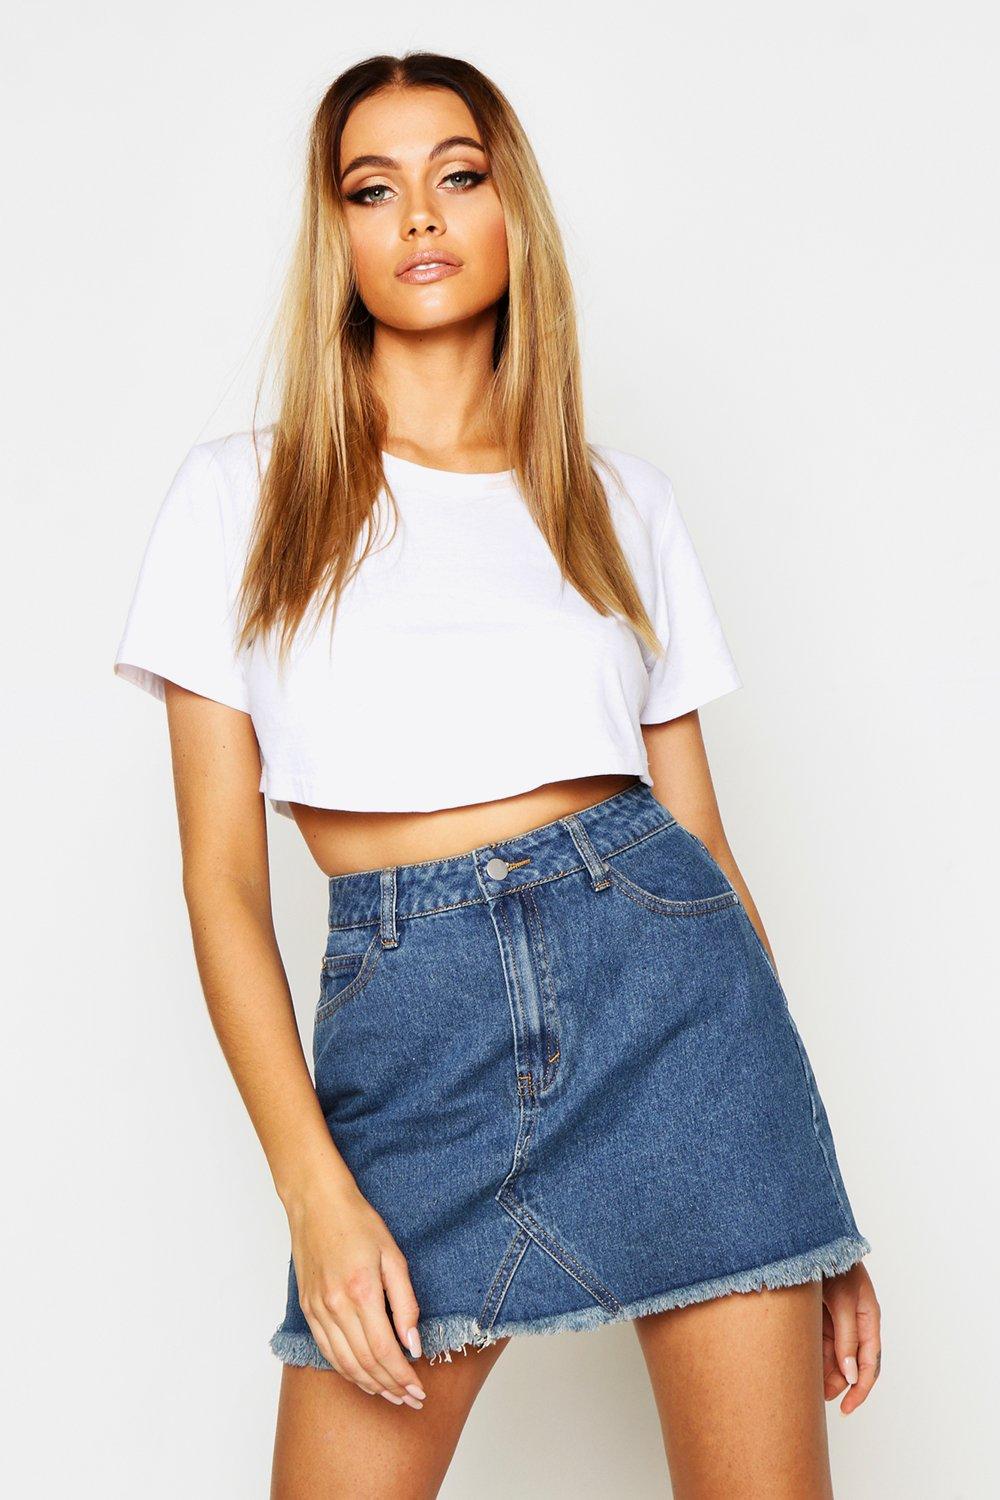 15 Denim Skirt Outfits That We Find So Cute Society19